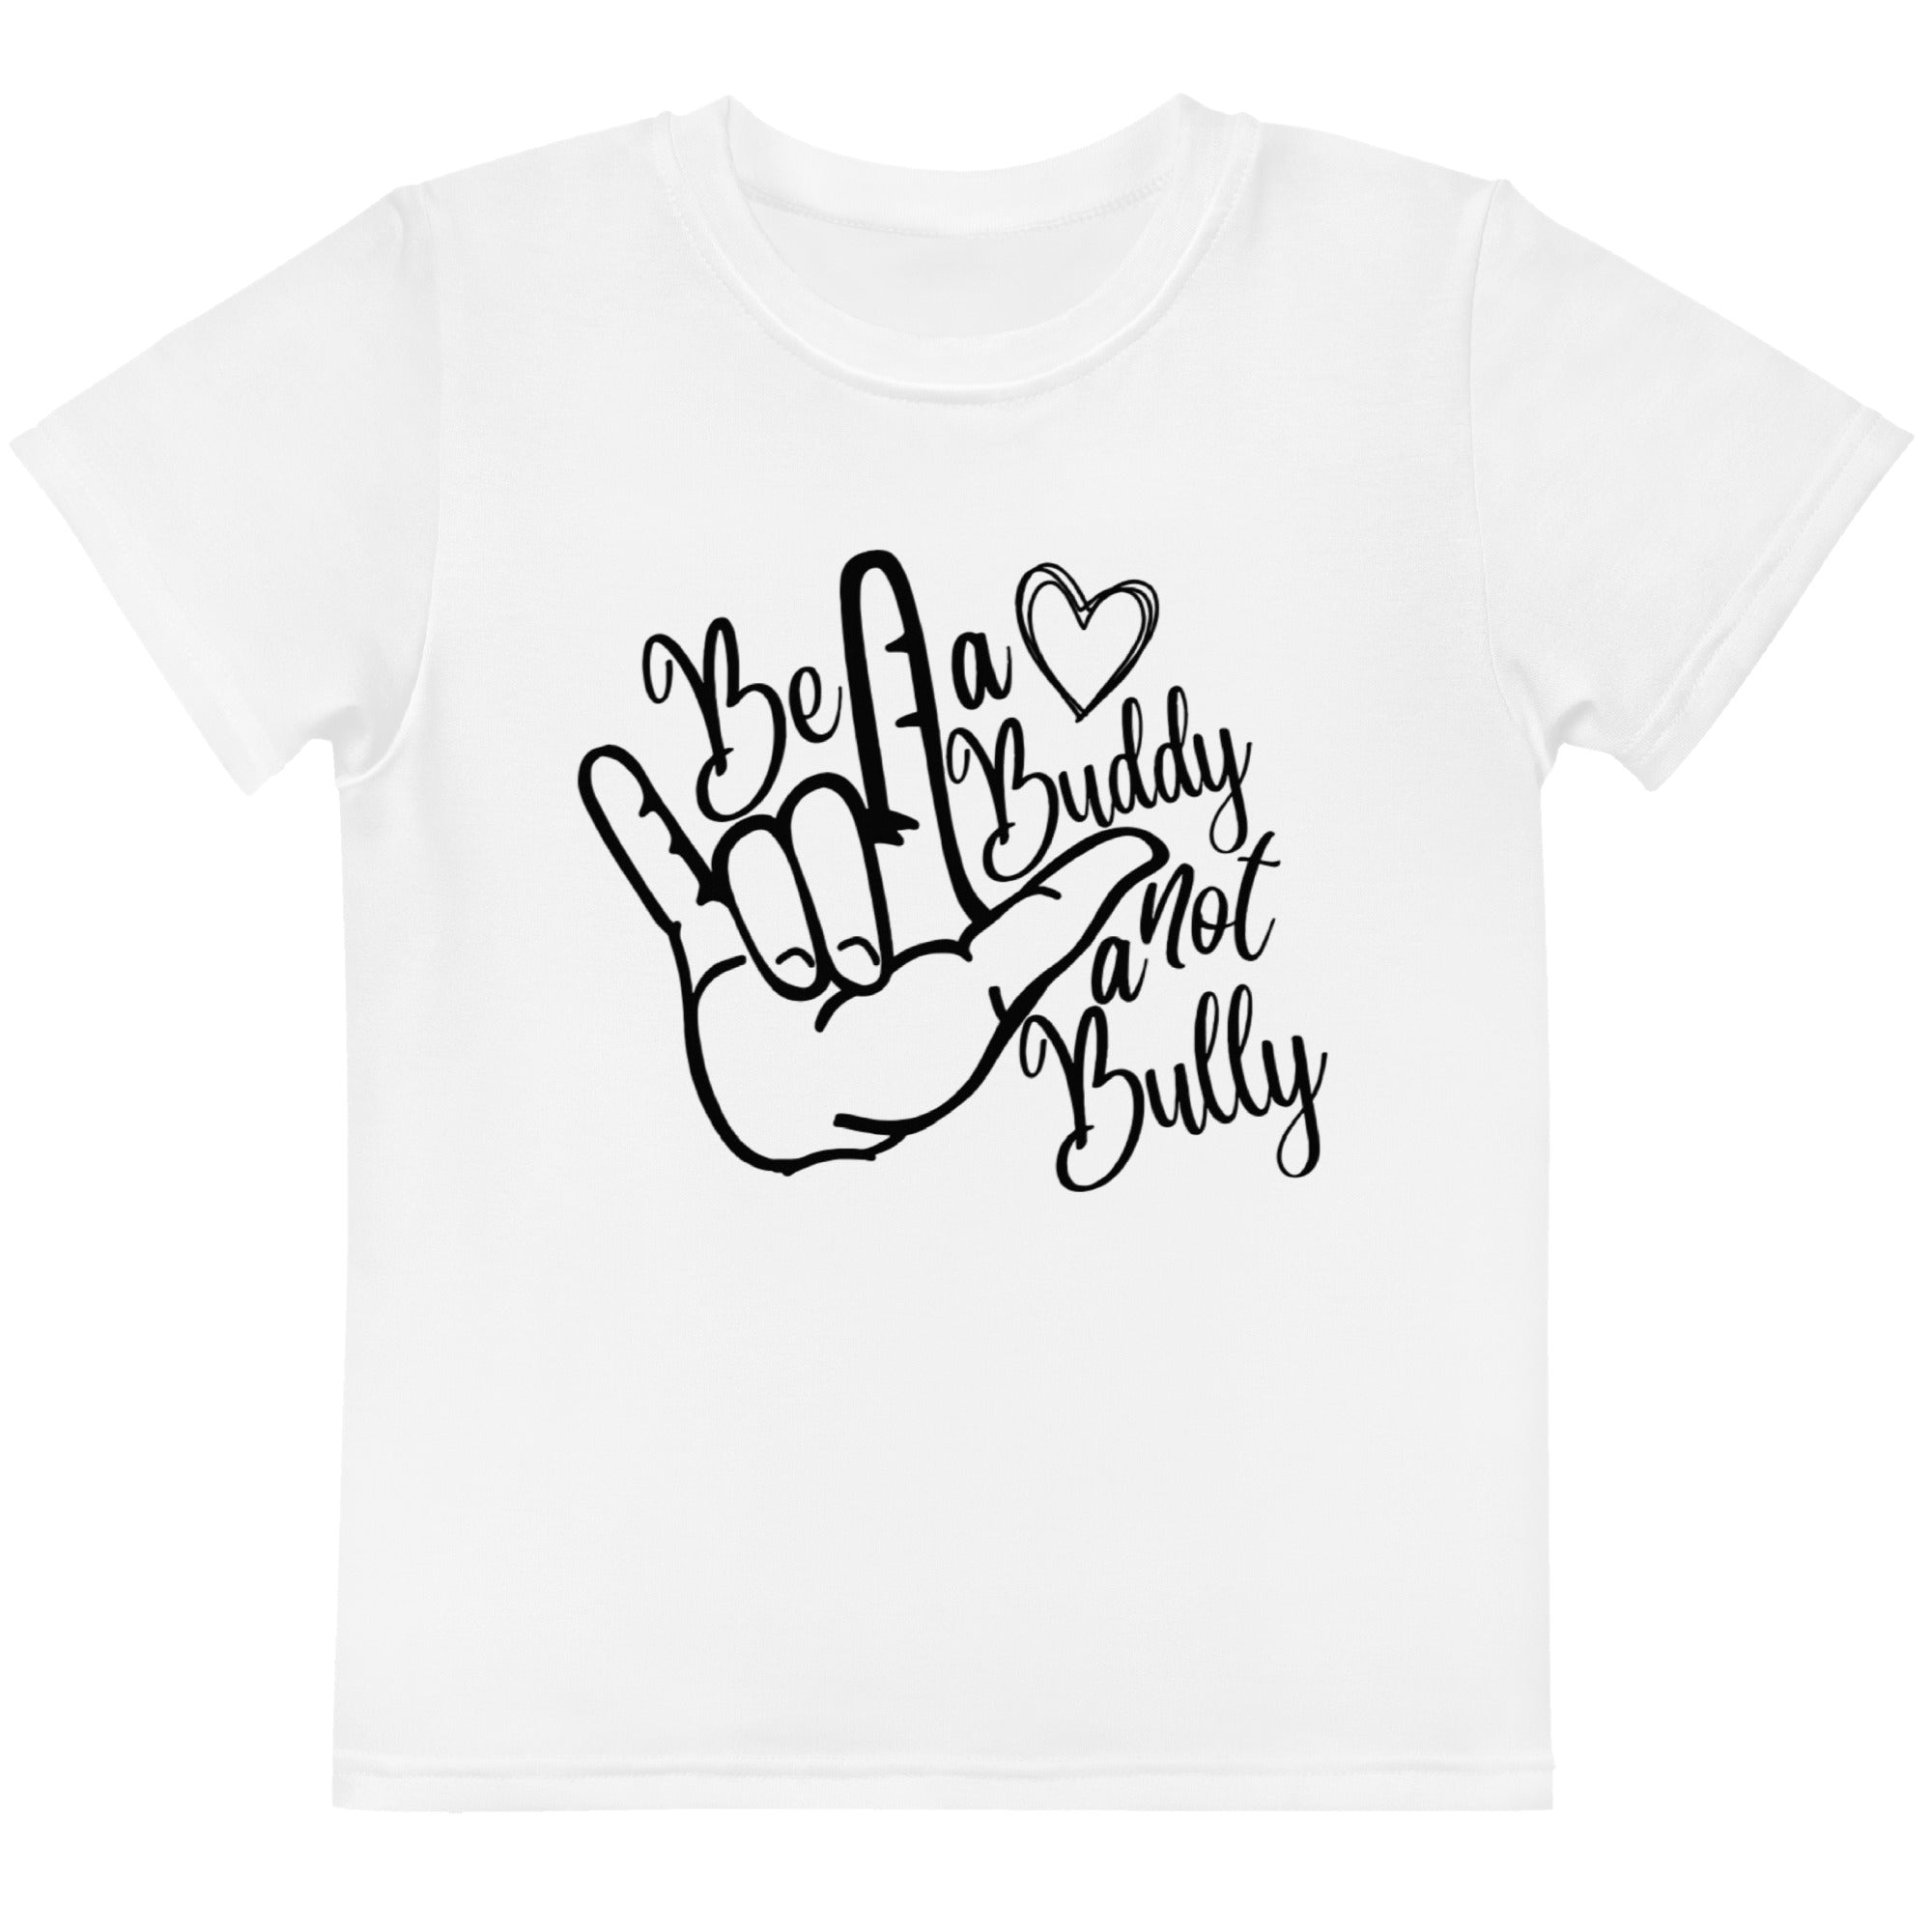 Be a Buddy not a Bully Kids Crew Neck T-shirt [Special Edition]